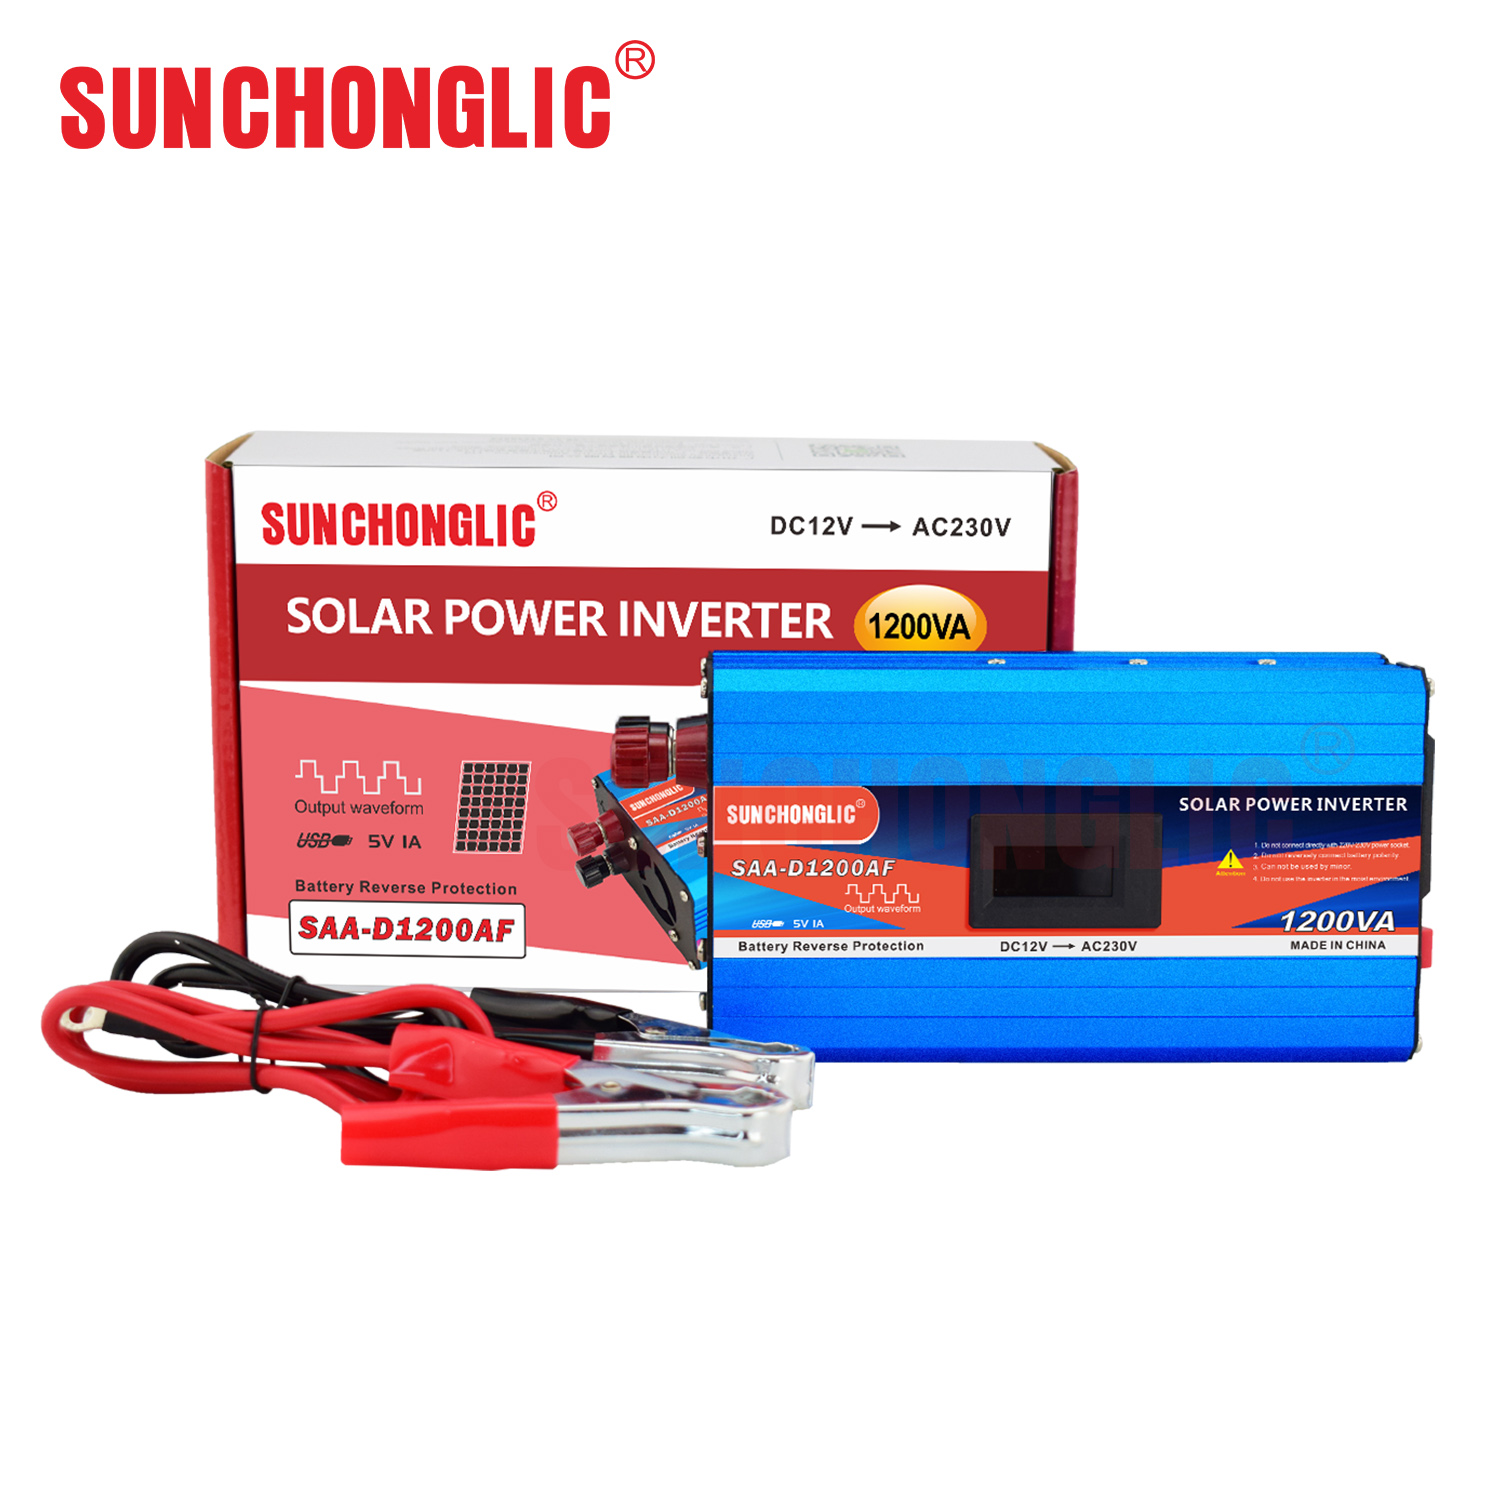 Sine Appliance Inverter - Wave Modified Co., Sunchonglic SAA-D1200AF Foshan - Electric